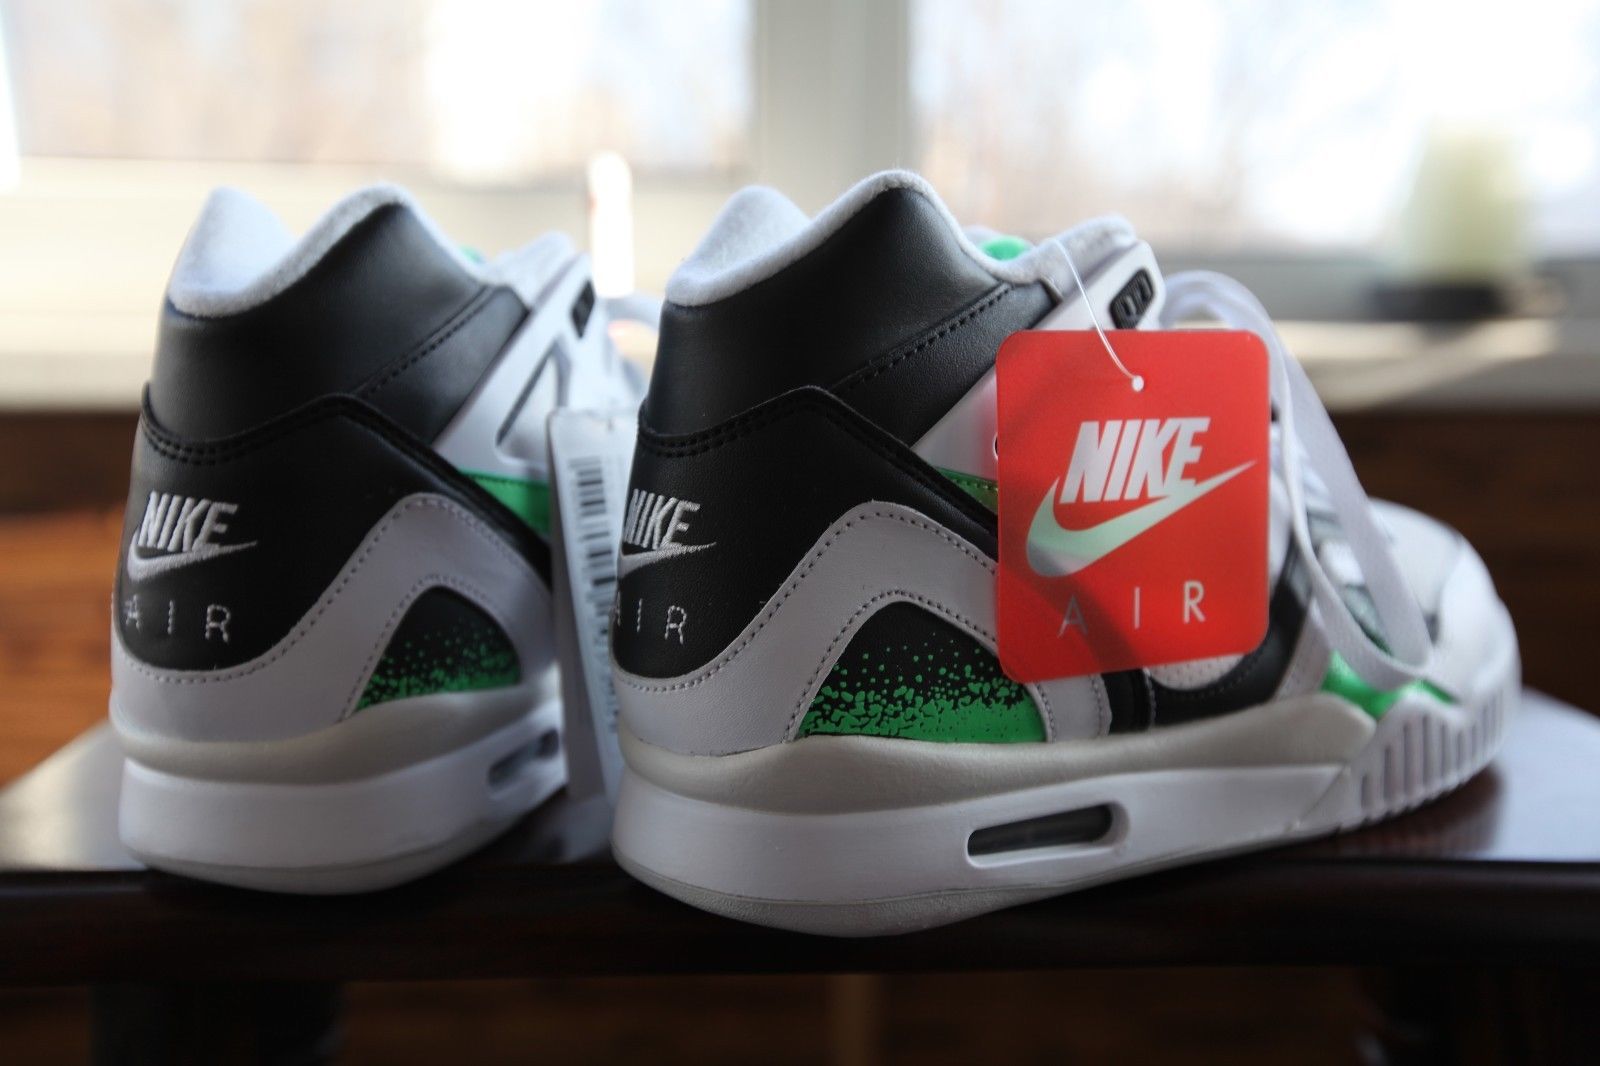 Nike Air Tech Challenge II ‘White/Black-Poison Green’ | New Images